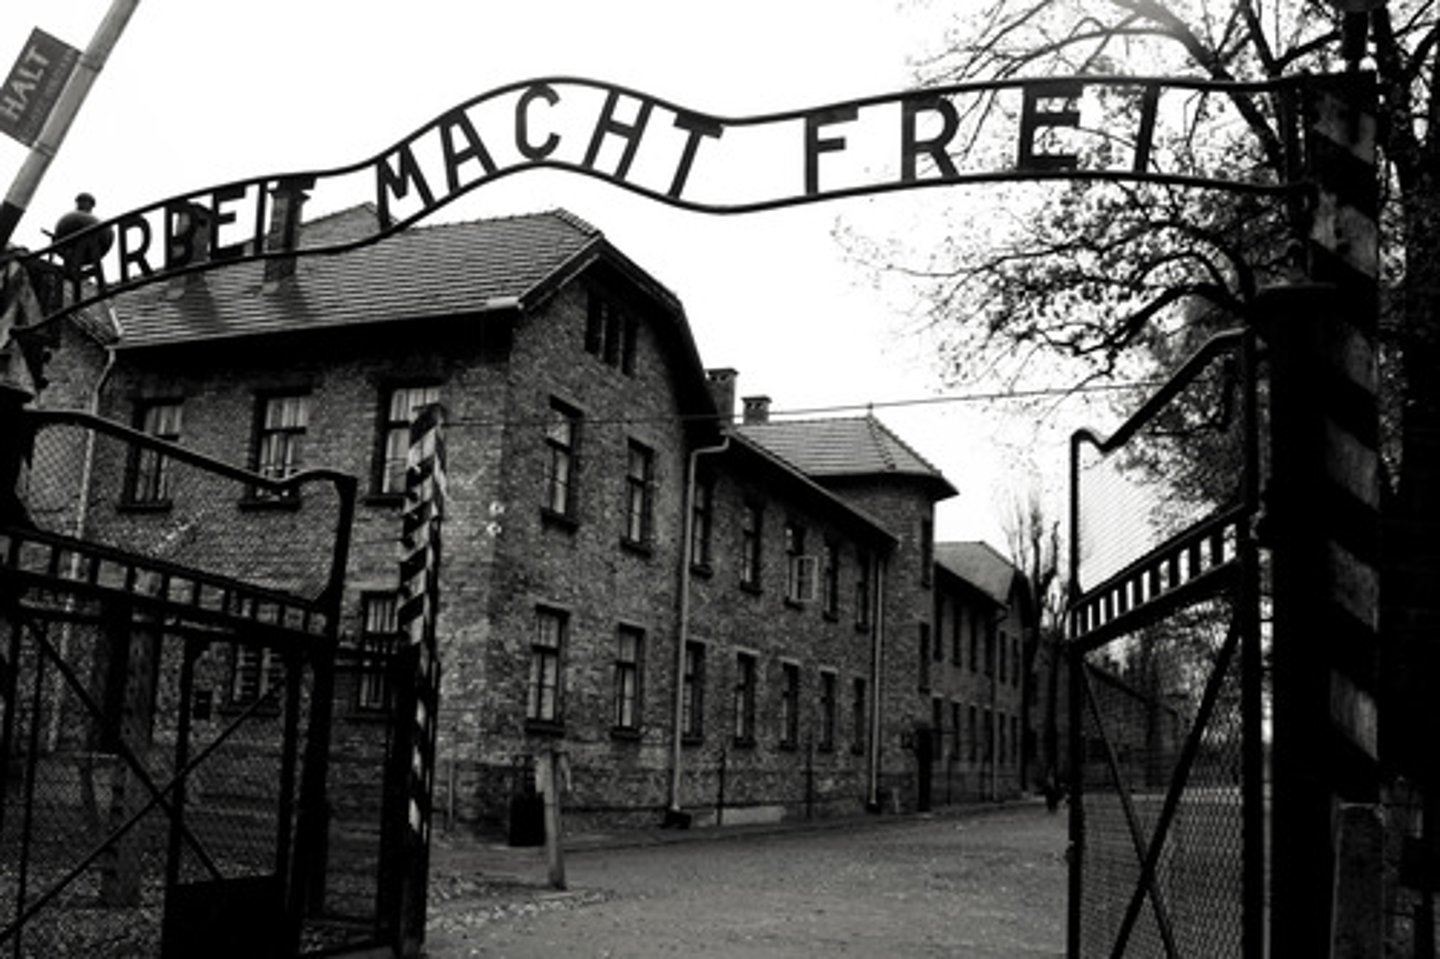 <p>A guarded compound for the detention or imprisonment of aliens, members of ethnic minorities, political opponents. Primarily Jewish Europeans during WWII.</p>